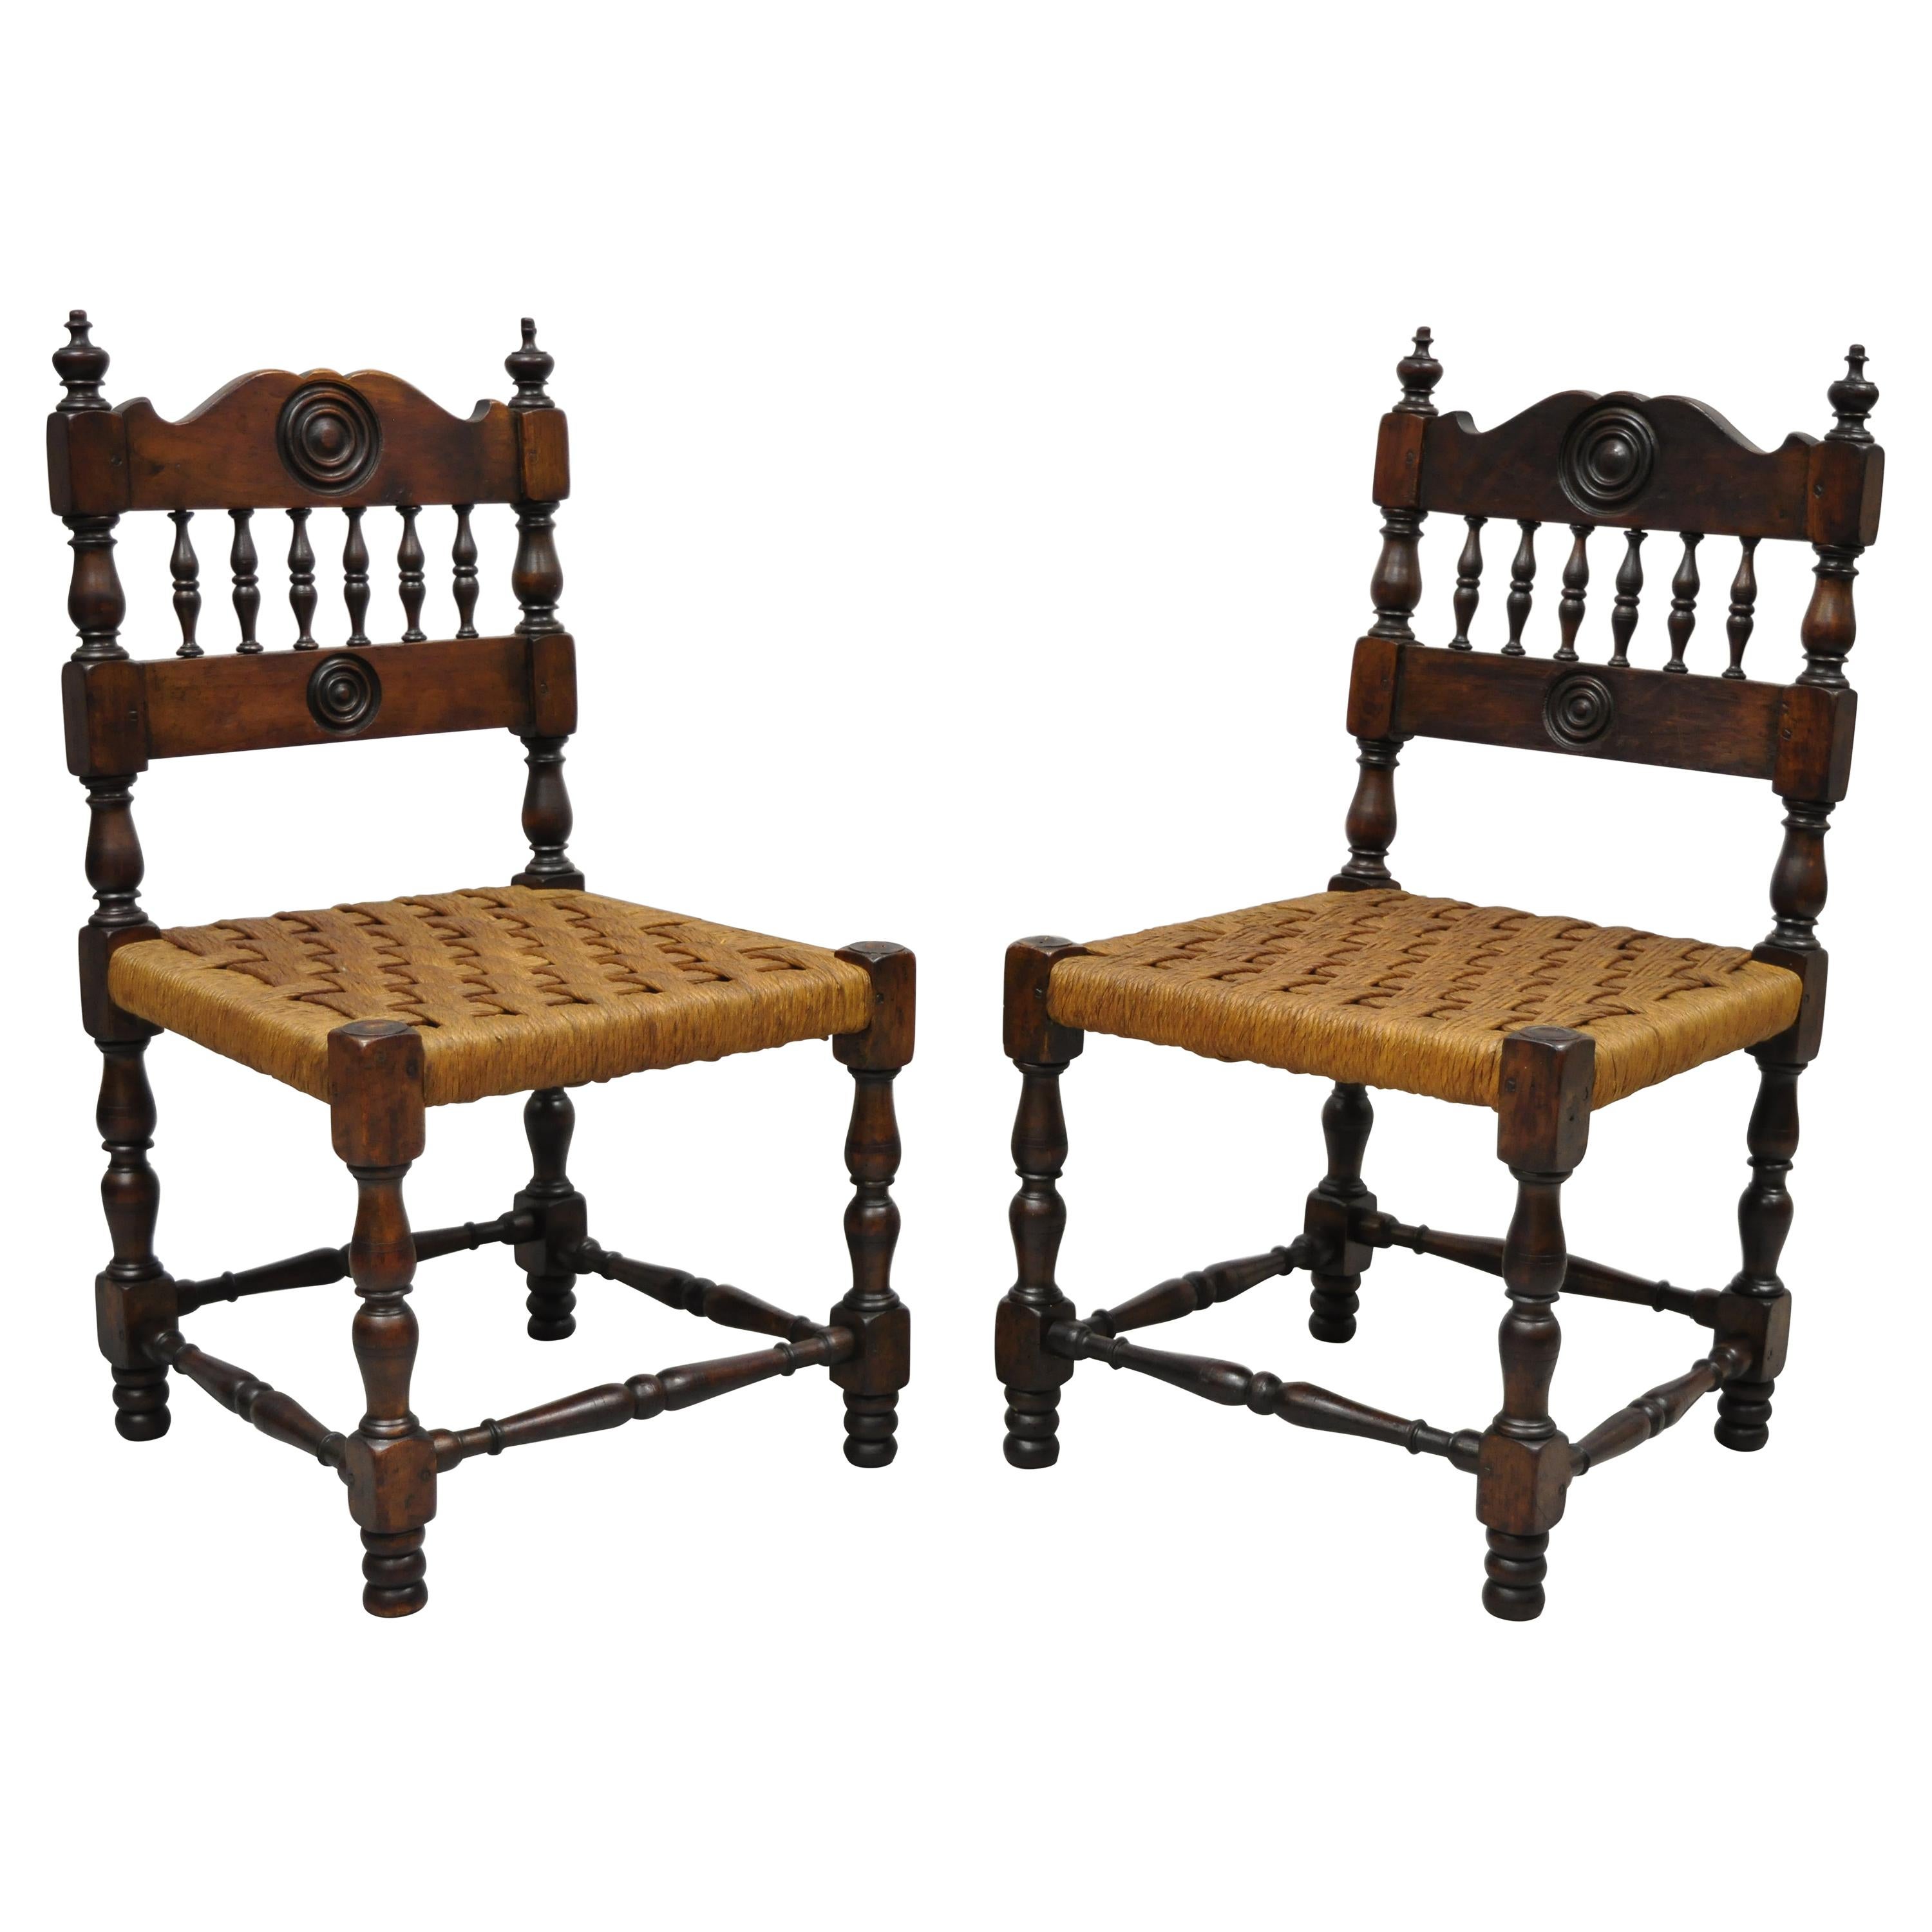 Antique Henry II Walnut Rush Seat Small Childrens Child Side Chairs, a Pair For Sale